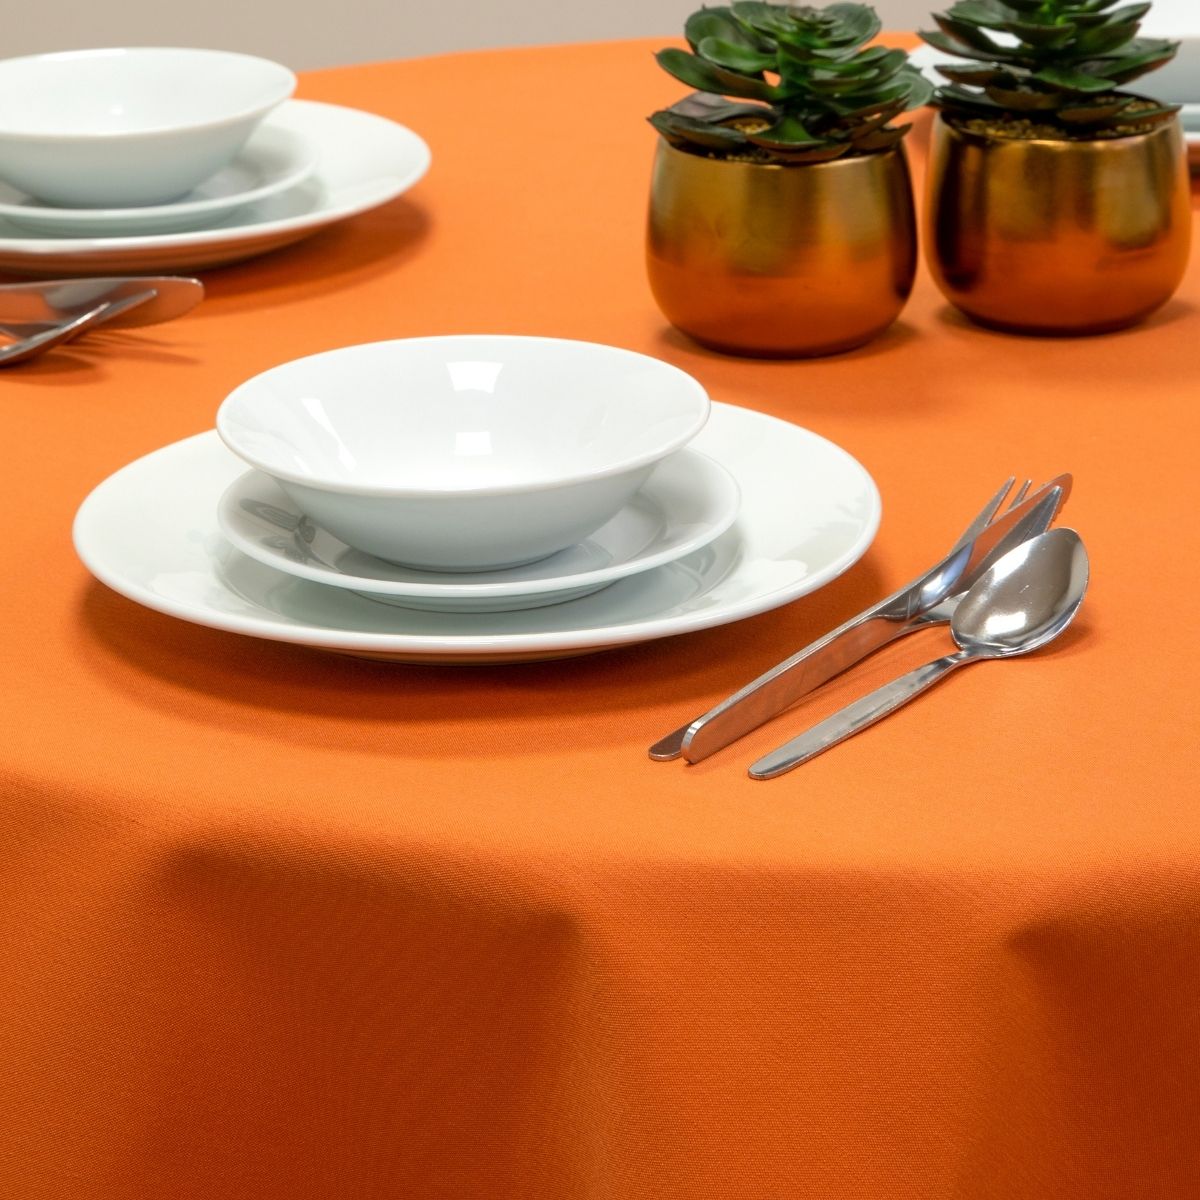 dining table with orange table cloth and cutlery